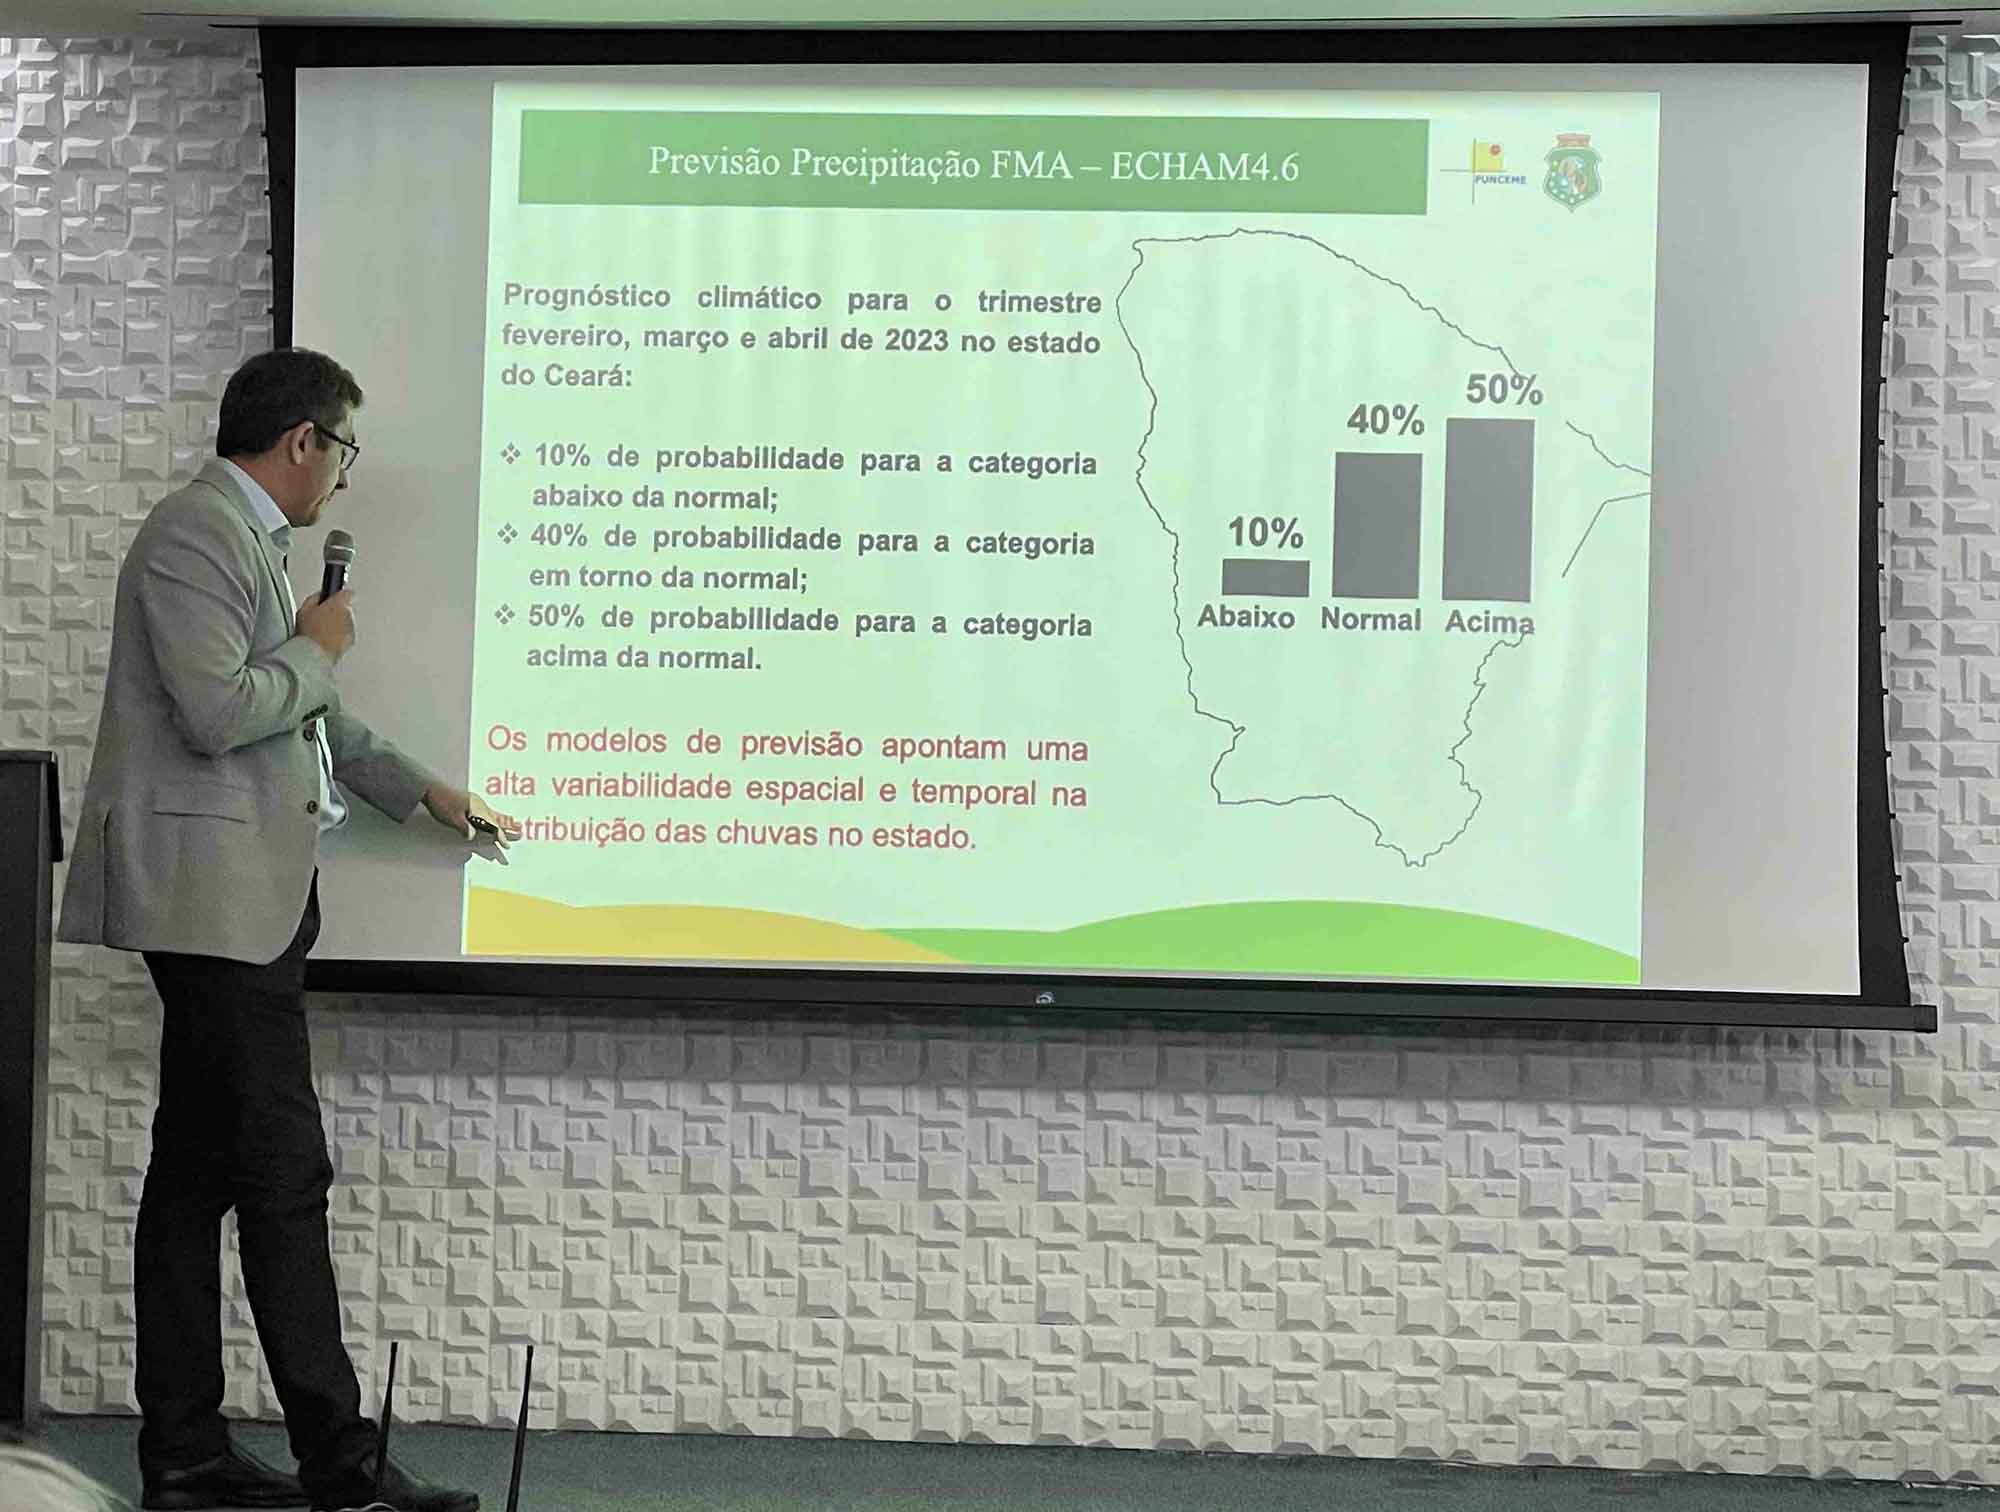 Dr. Eduardo Sávio Martins of Funceme pointing to presentation slide with seasonal forecast information indicating probabilities of rainfall of 10 percent below average, 40 percent around average, and 50 percent above average. Text in red states that the models indicate high spatial and temporal variability for rainfall.